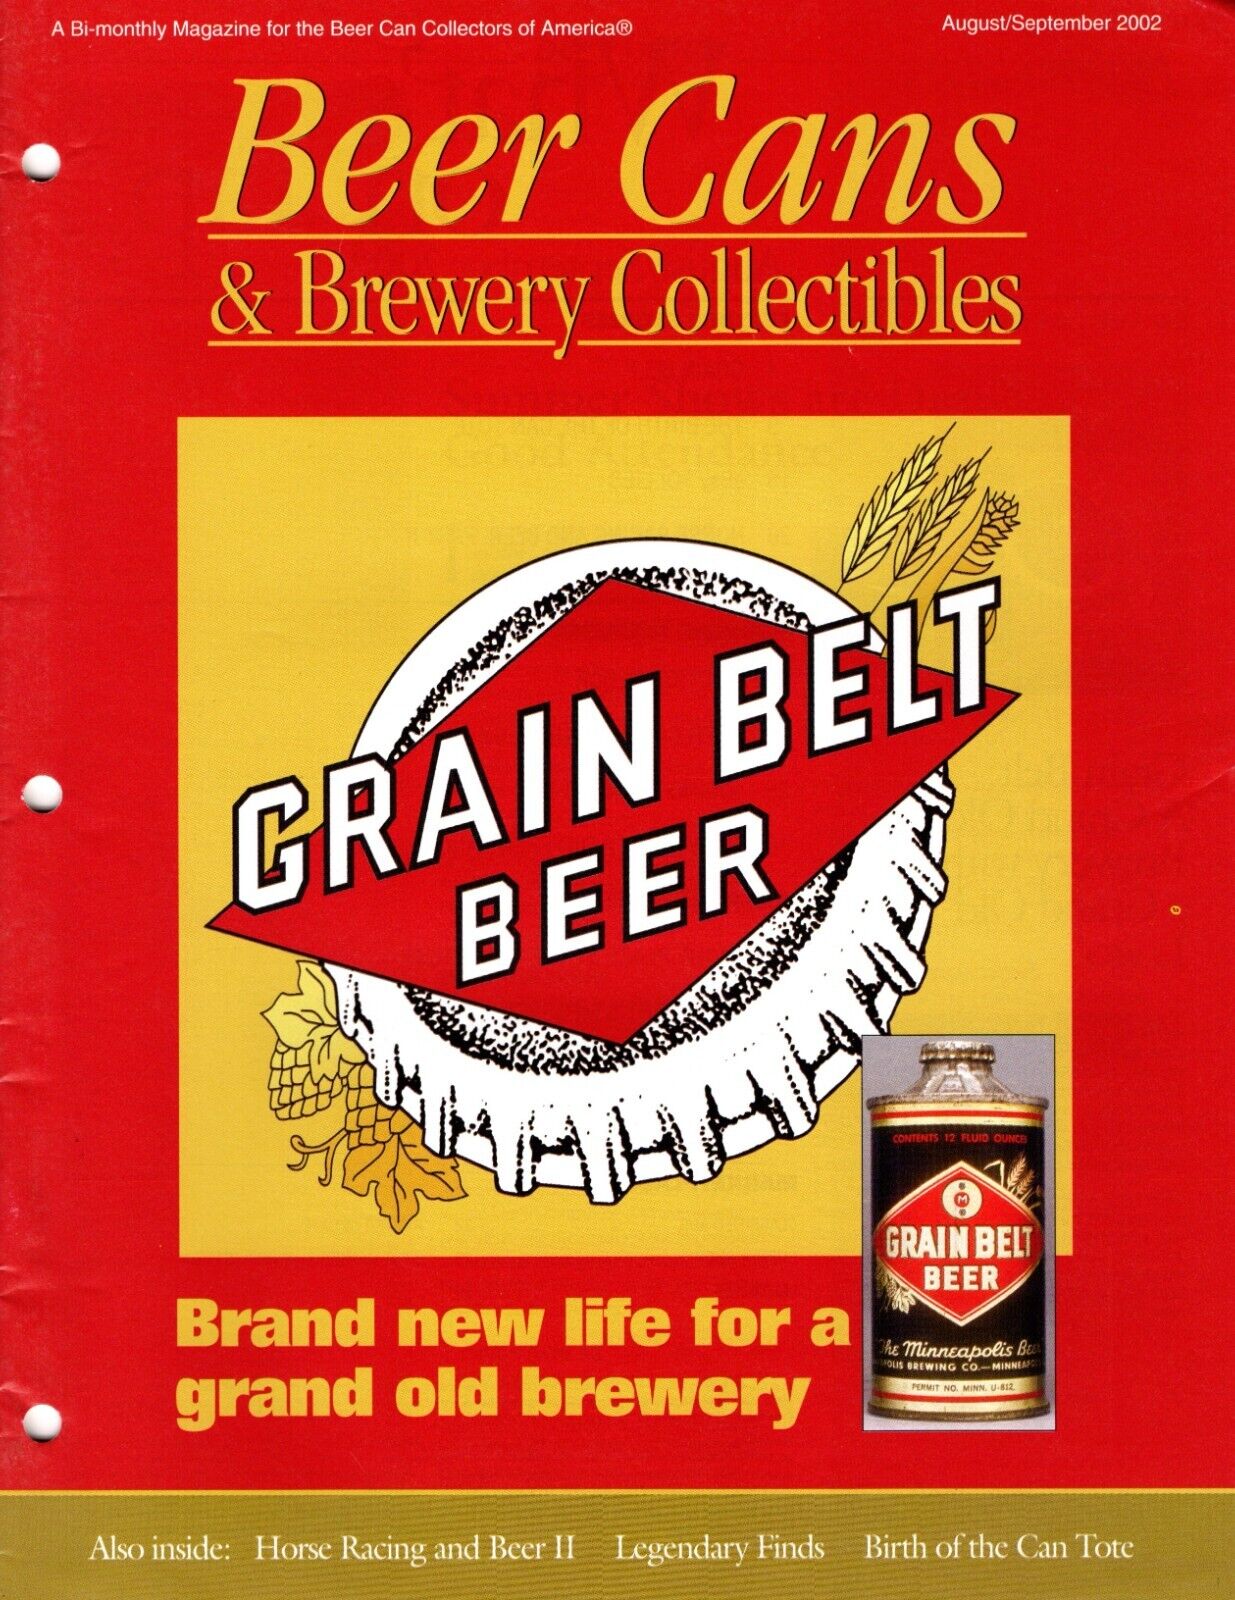 BCCA BREWERIANA BEER CAN COLLECTOR MAGAZINE AUG SEPT 02 ABA NABA GRAIN BELT BREW